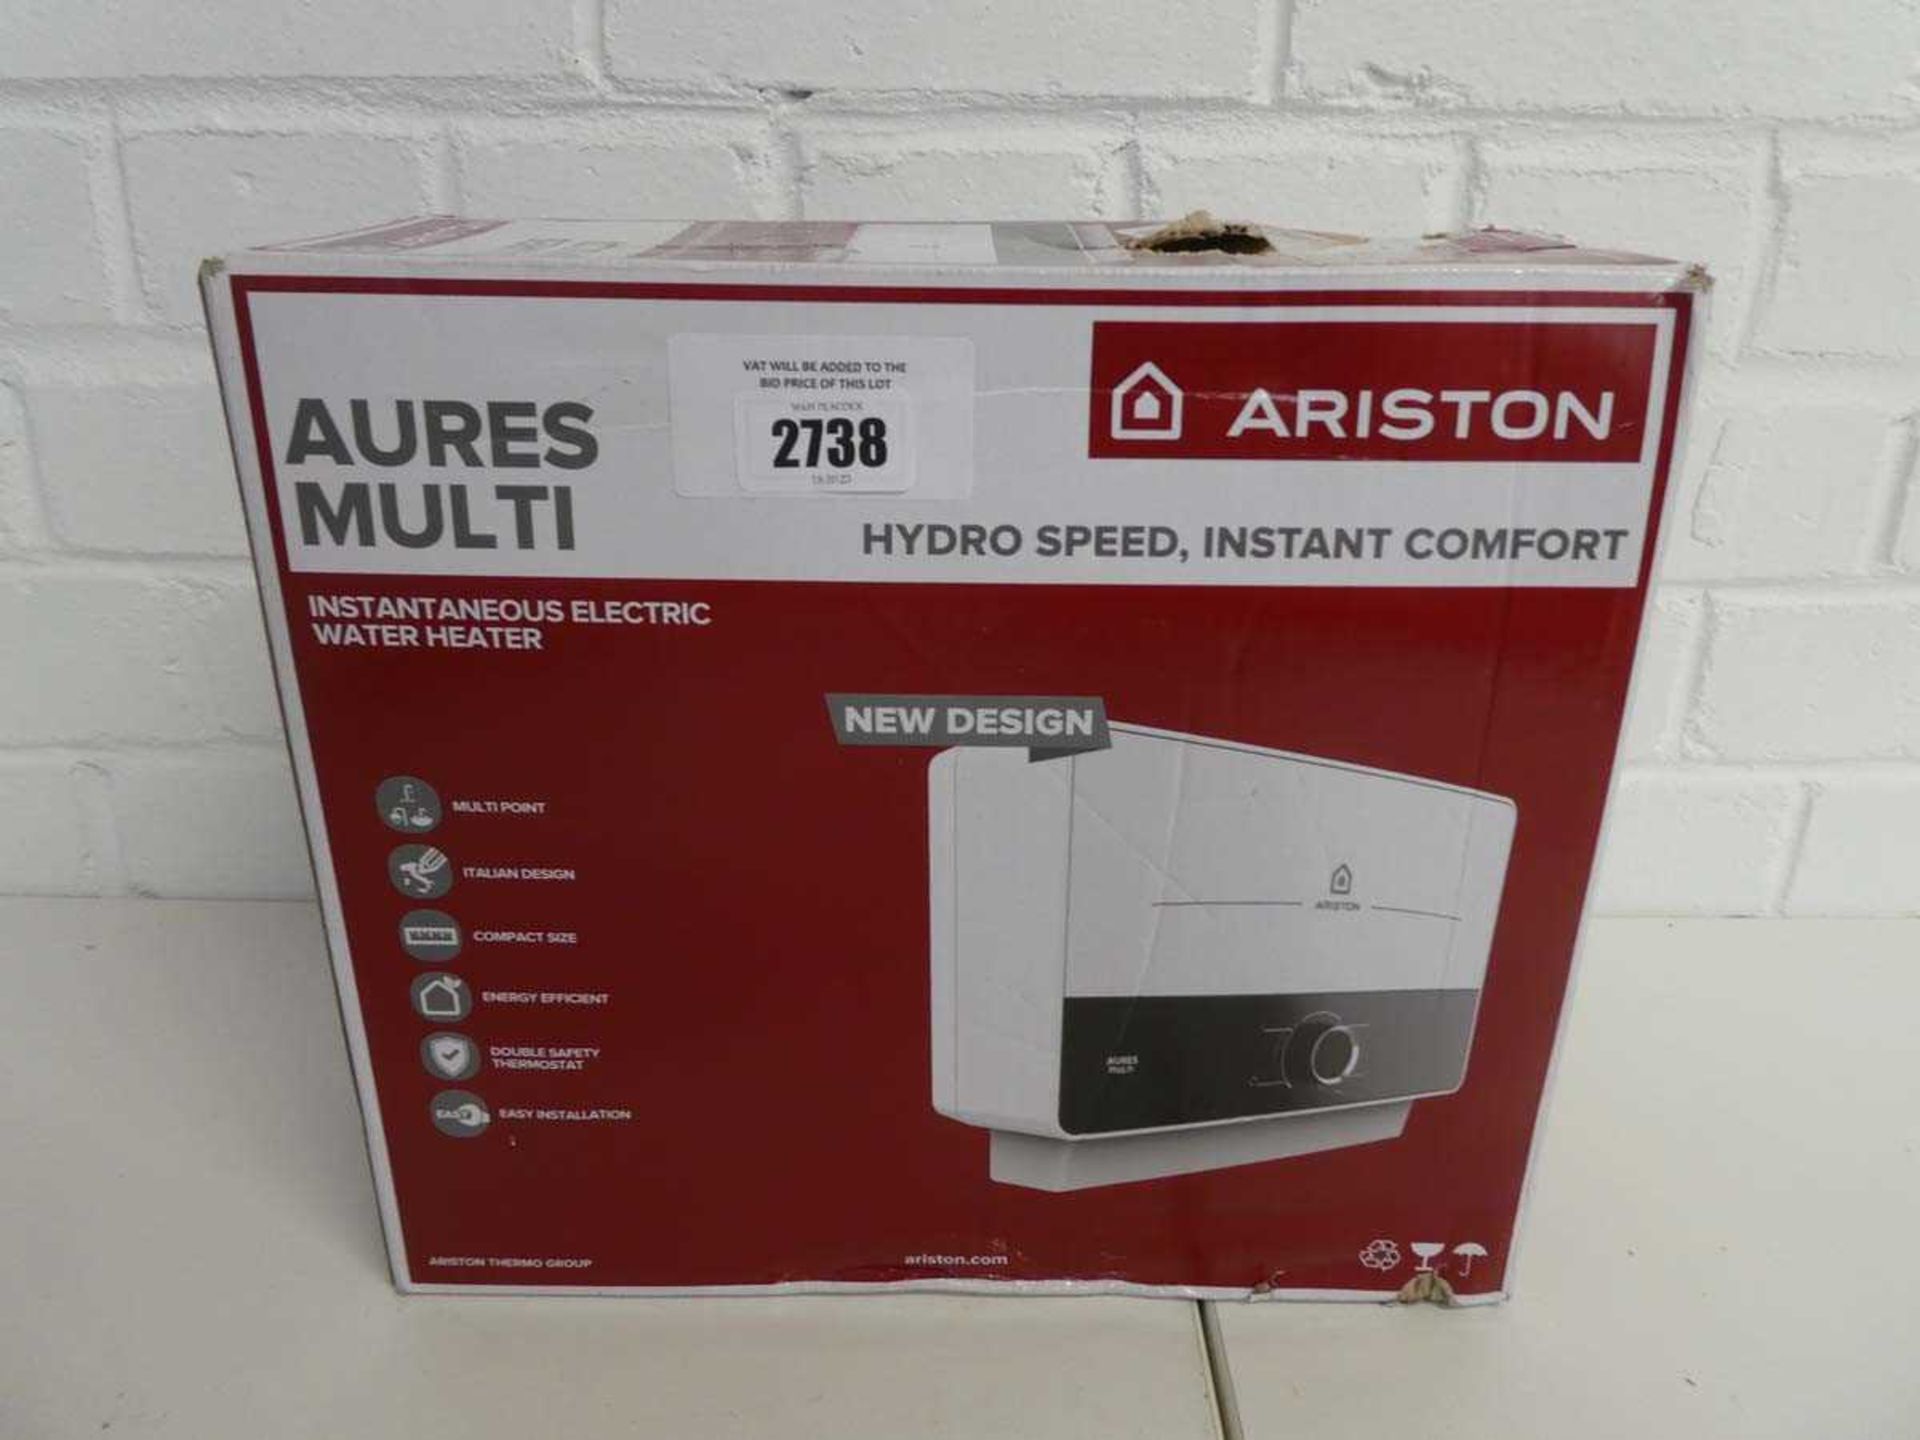 +VAT Boxed Ariston Instantaneous electric water heater